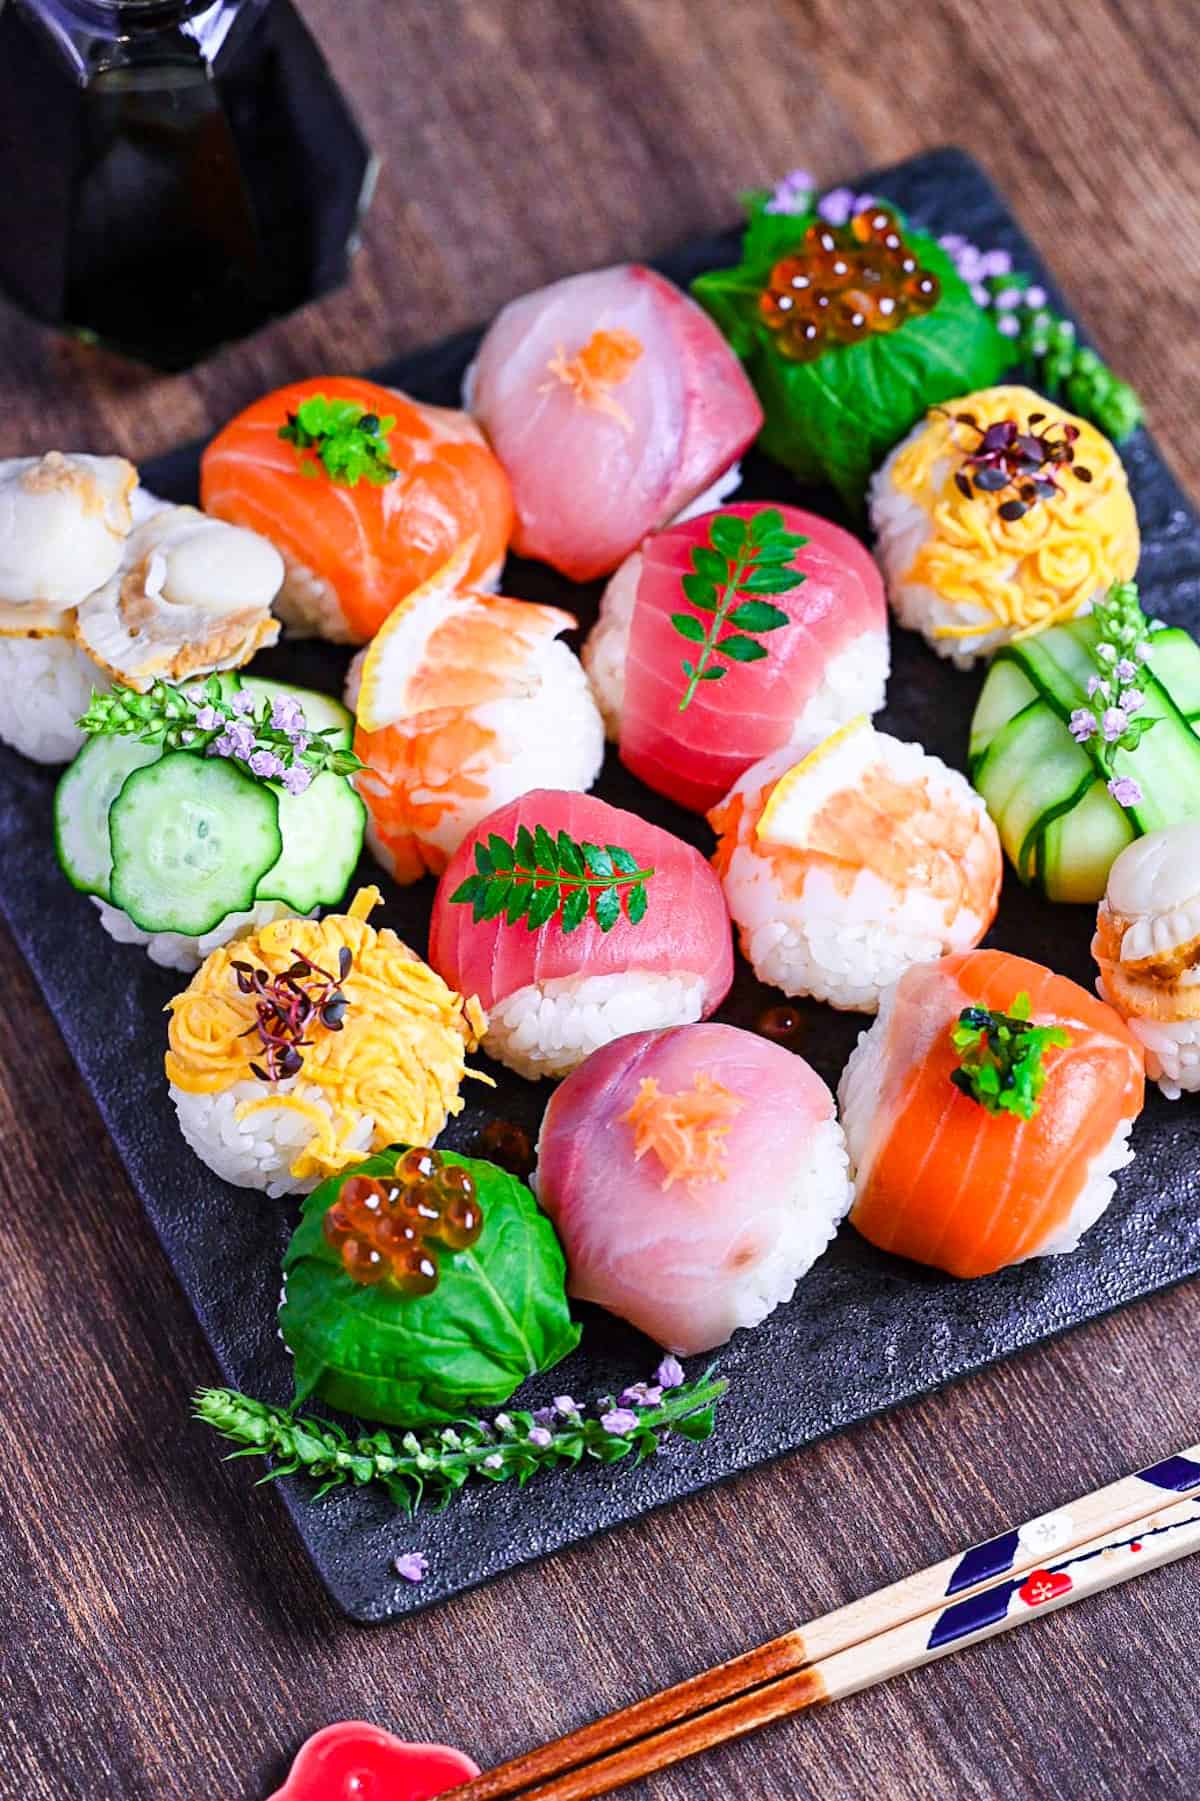 decorative temarizushi made with various seafood, eggs and vegetables topped with leaves, salmon roe, flowers and lemon slices served on a square slate-style plate